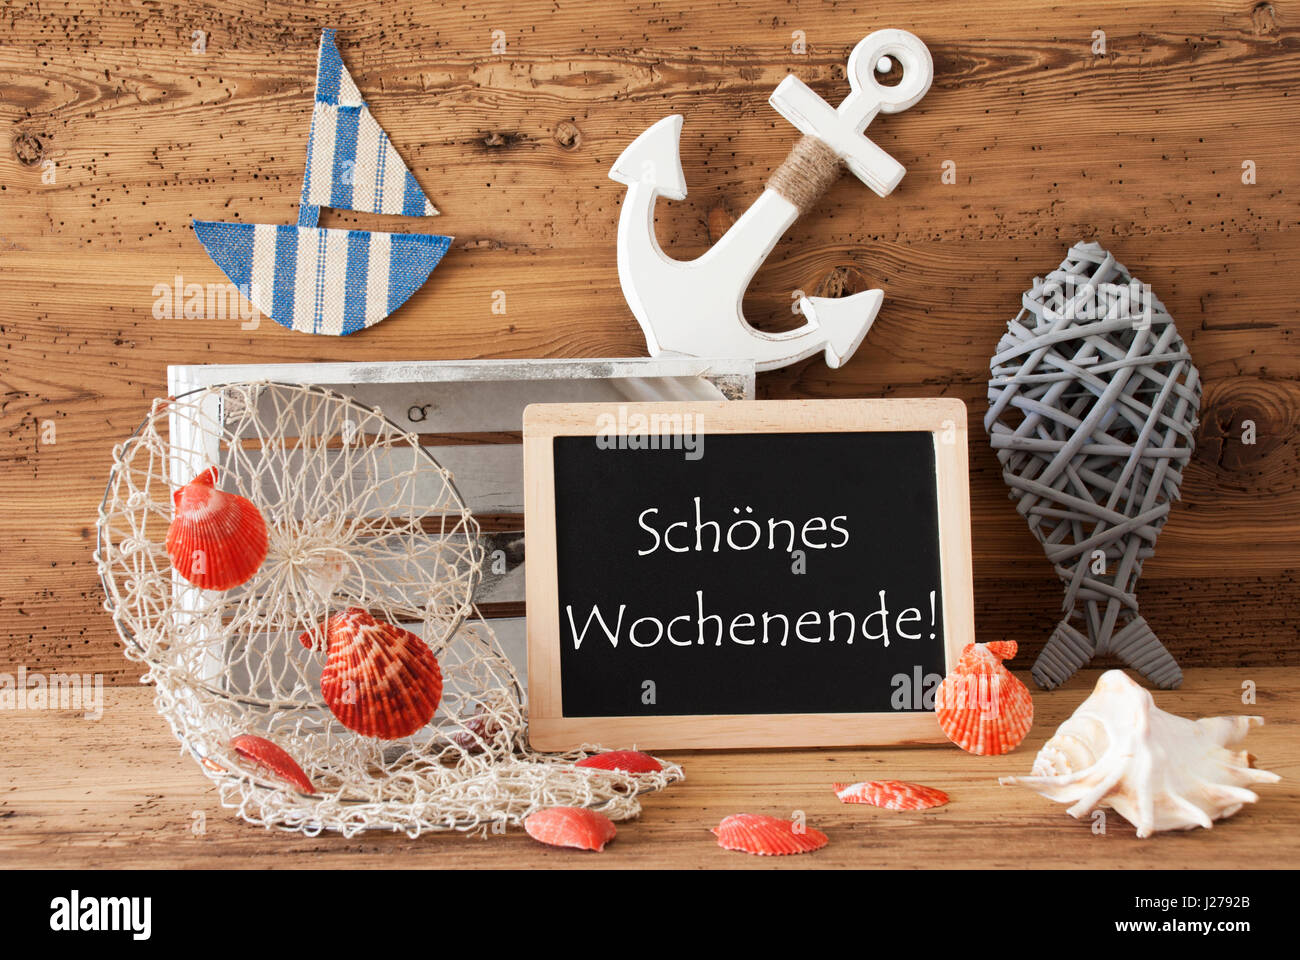 Chalkboard With Summer Decoration, Wochenende Means Weekend Stock Photo